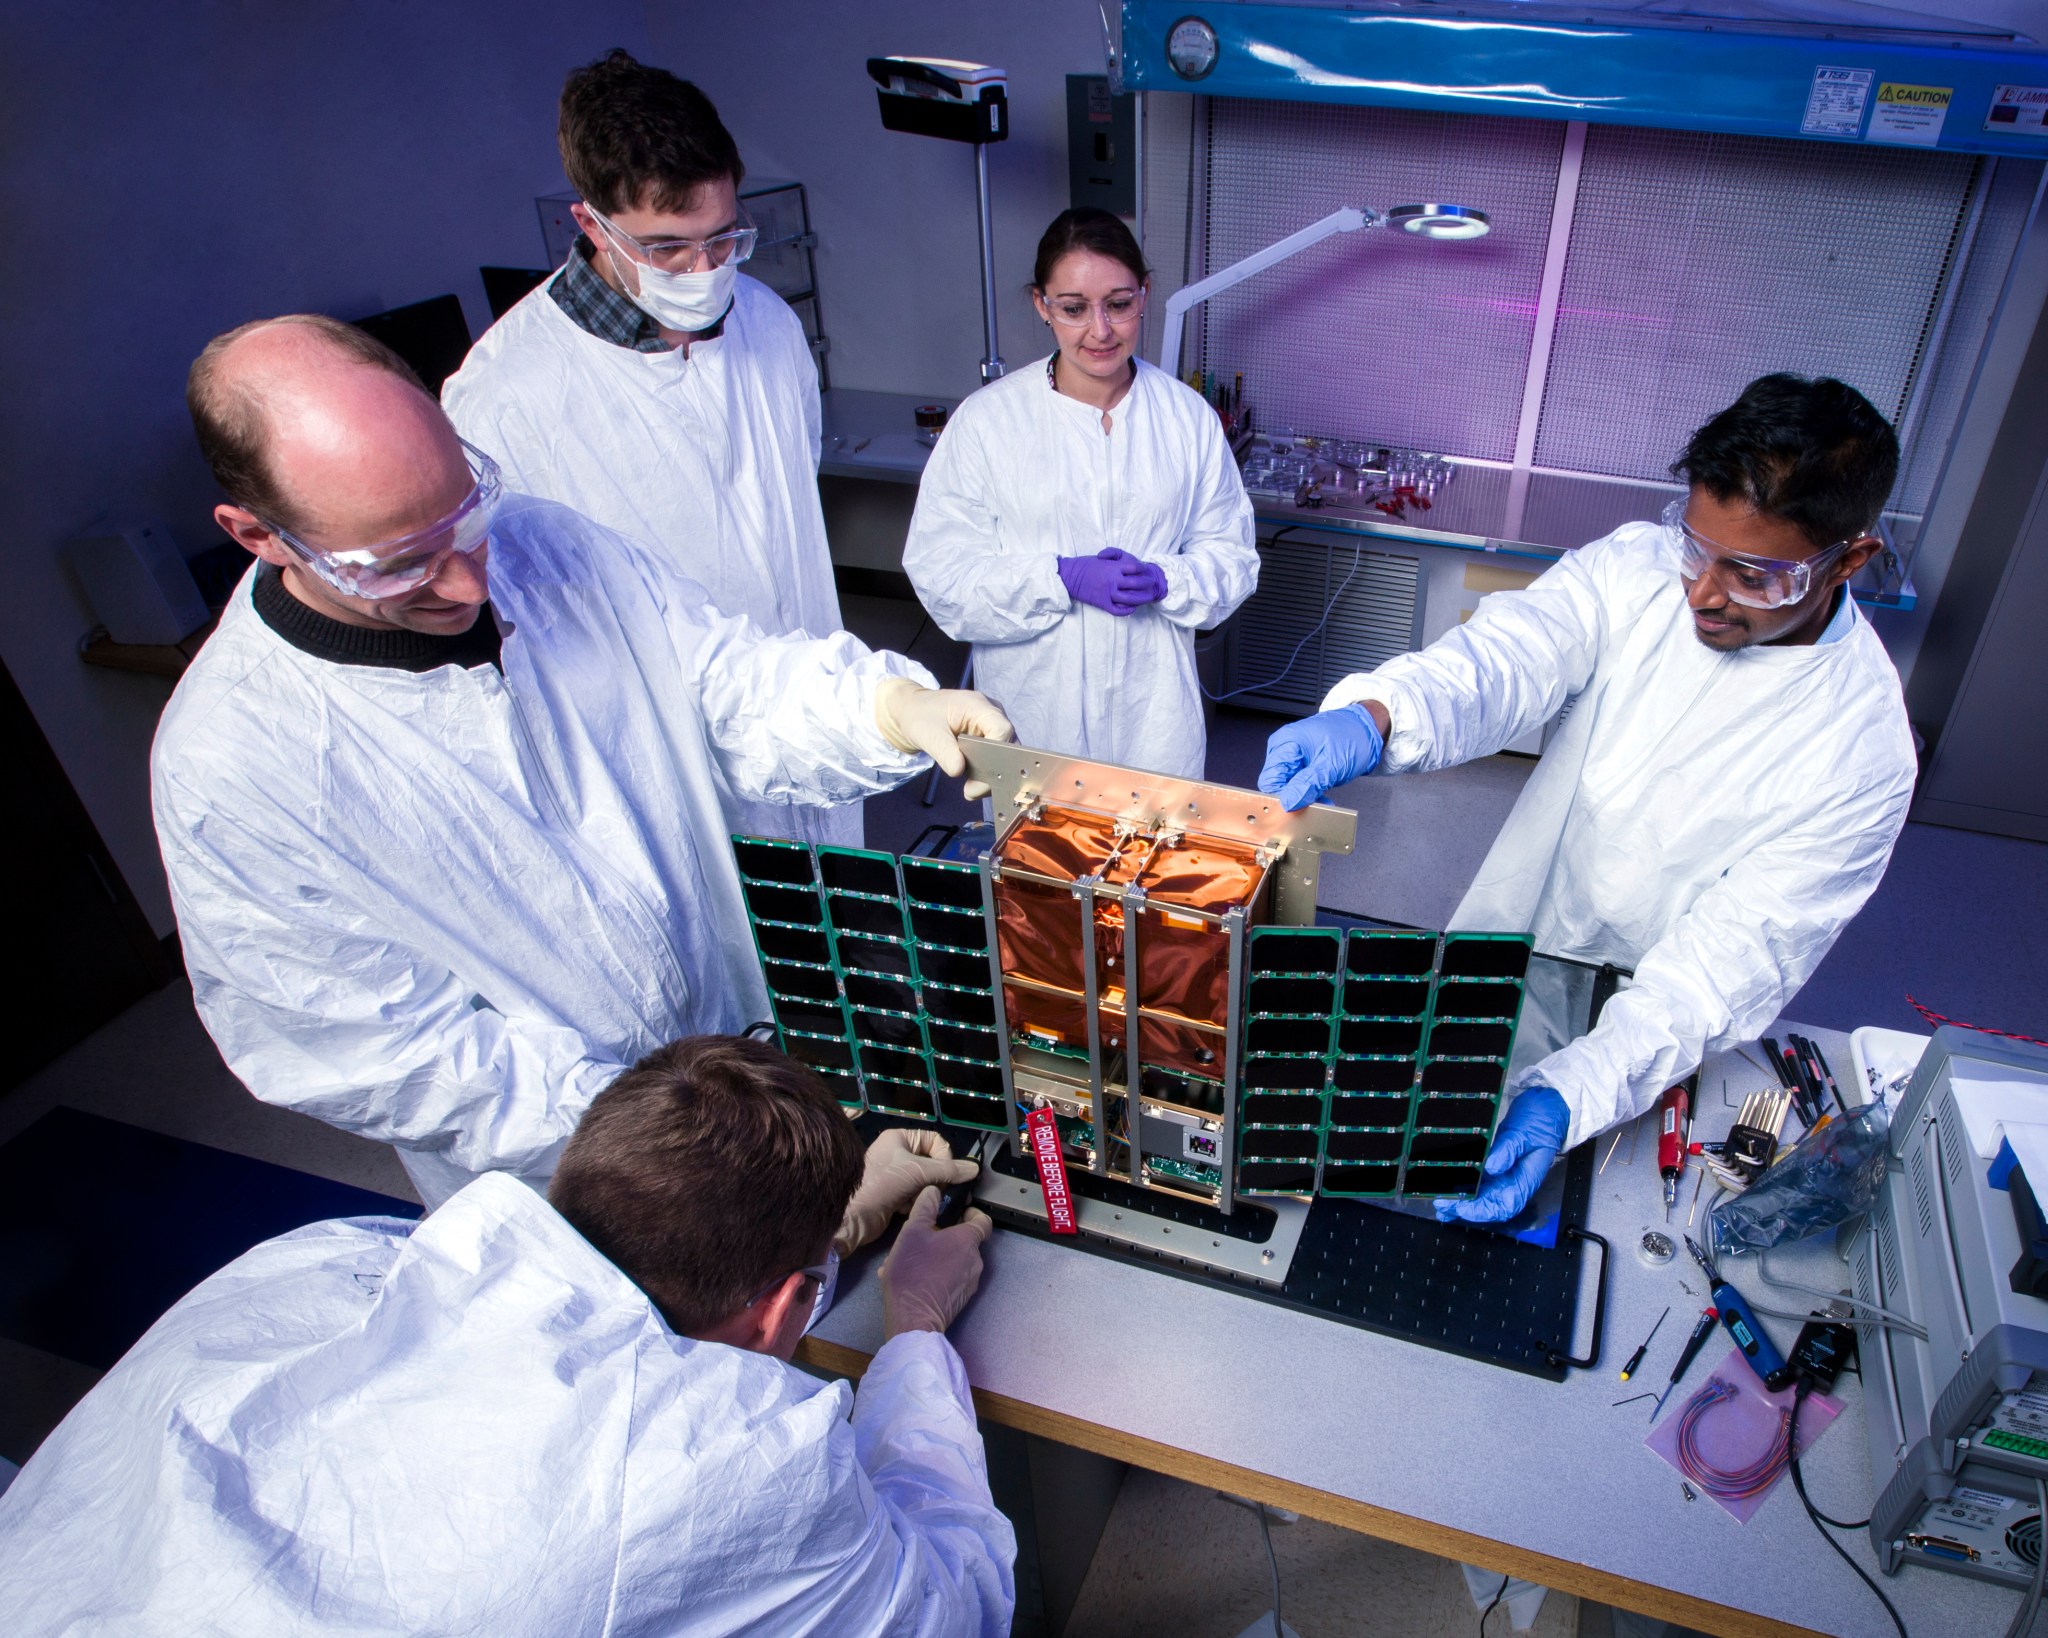 Five people in white lab coats standing around an instrument with a copper colored center and panels on either side.